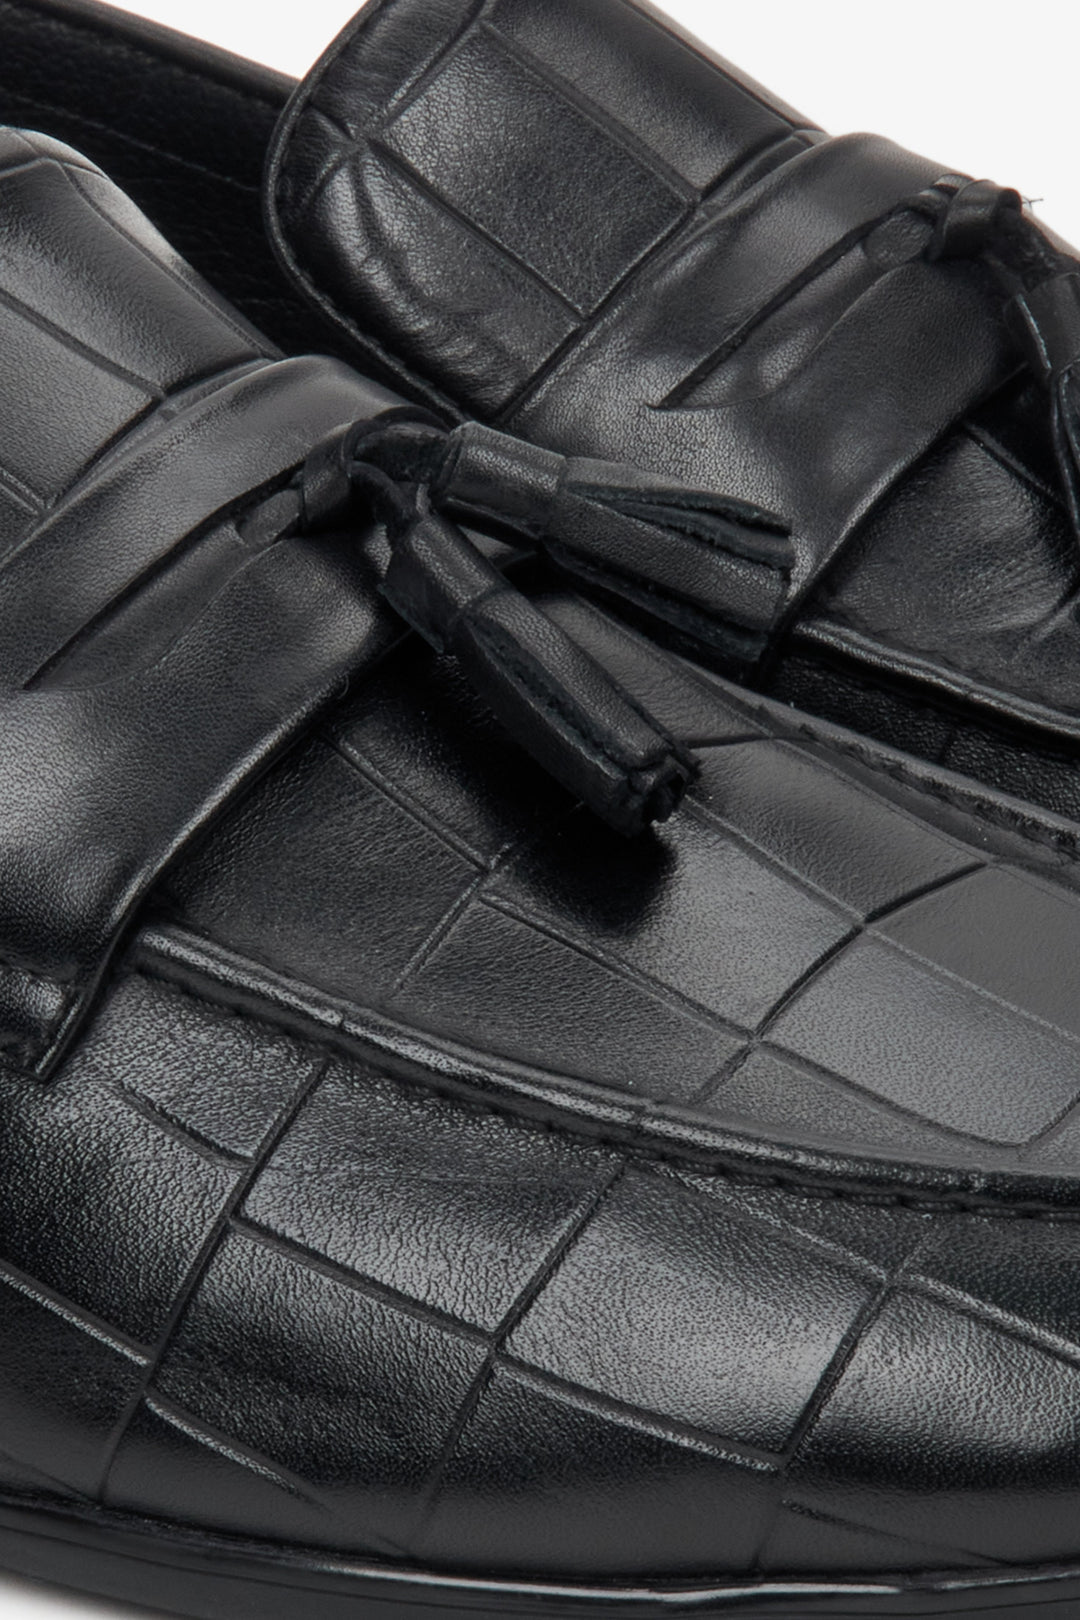 Men's black leather loafers - close-up of the texture of the material and embellishments.